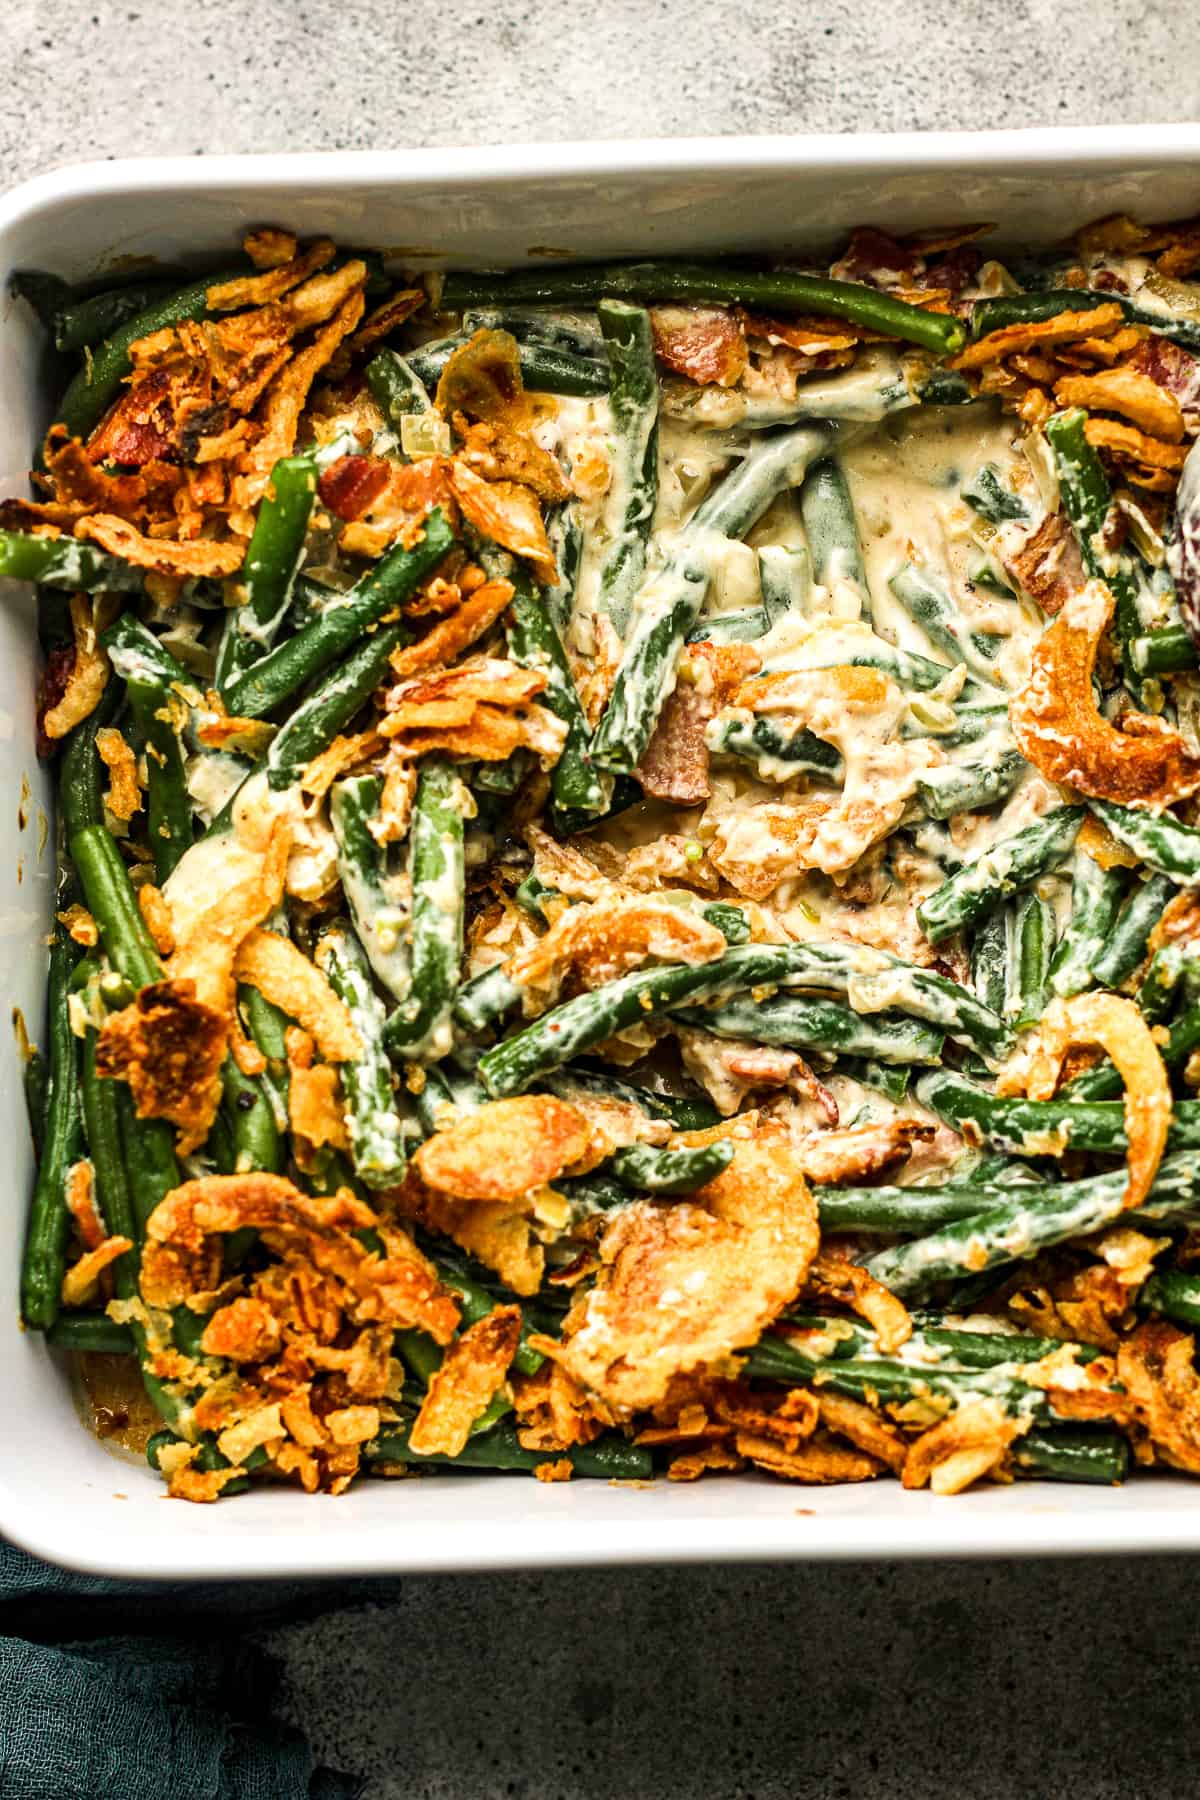 Overhead view of green bean casserole showing the creamy inside.